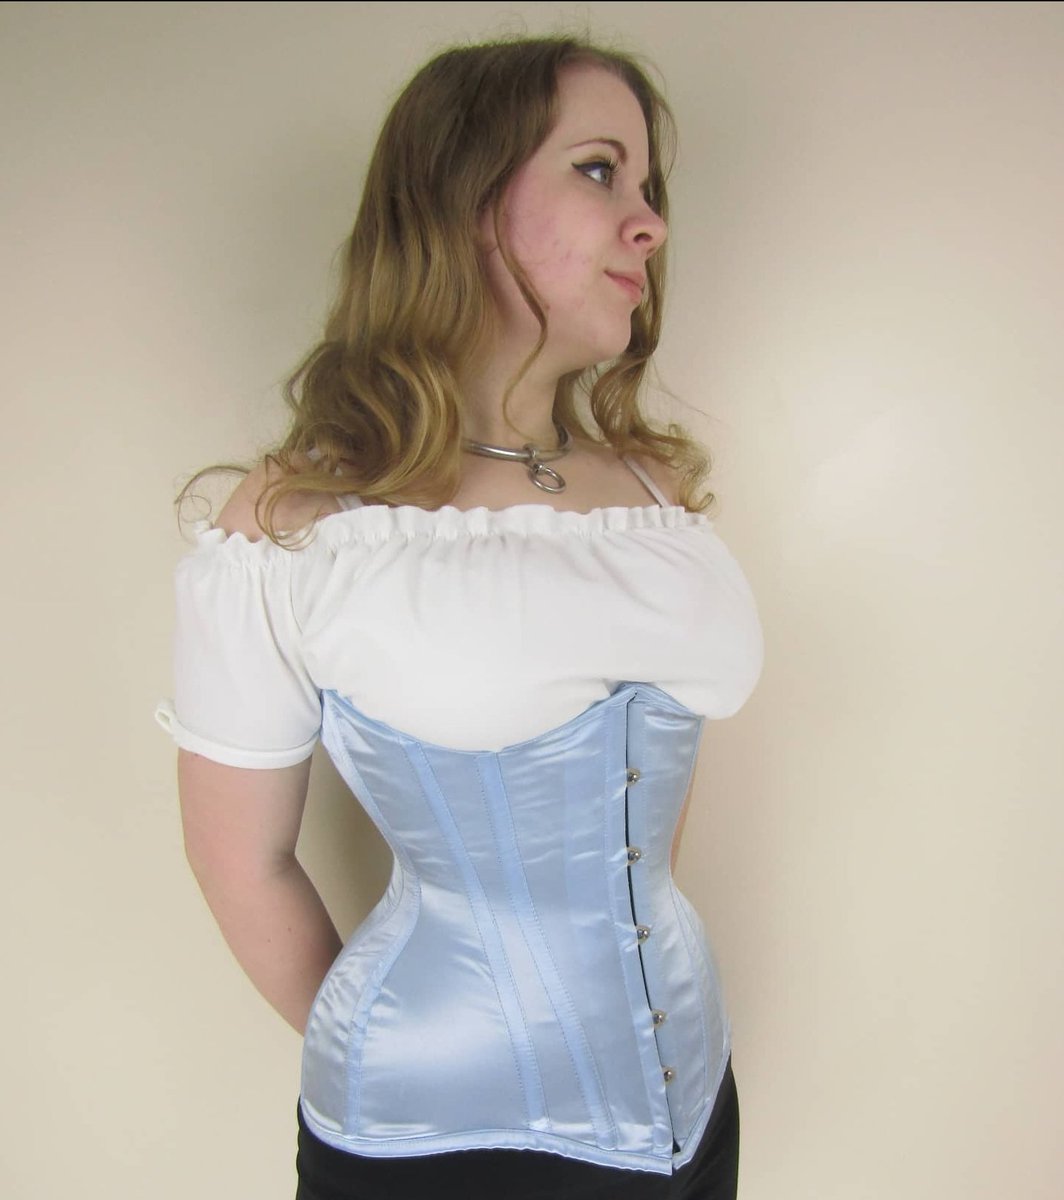 One of my favourite corsets due to the colour.

Available now is your custom size at:

Damnedcorsets.co.uk

#corsets #corsetry #corset #tightlacing #waisttrainer #waisttrainers #customcorset #customcorsetry